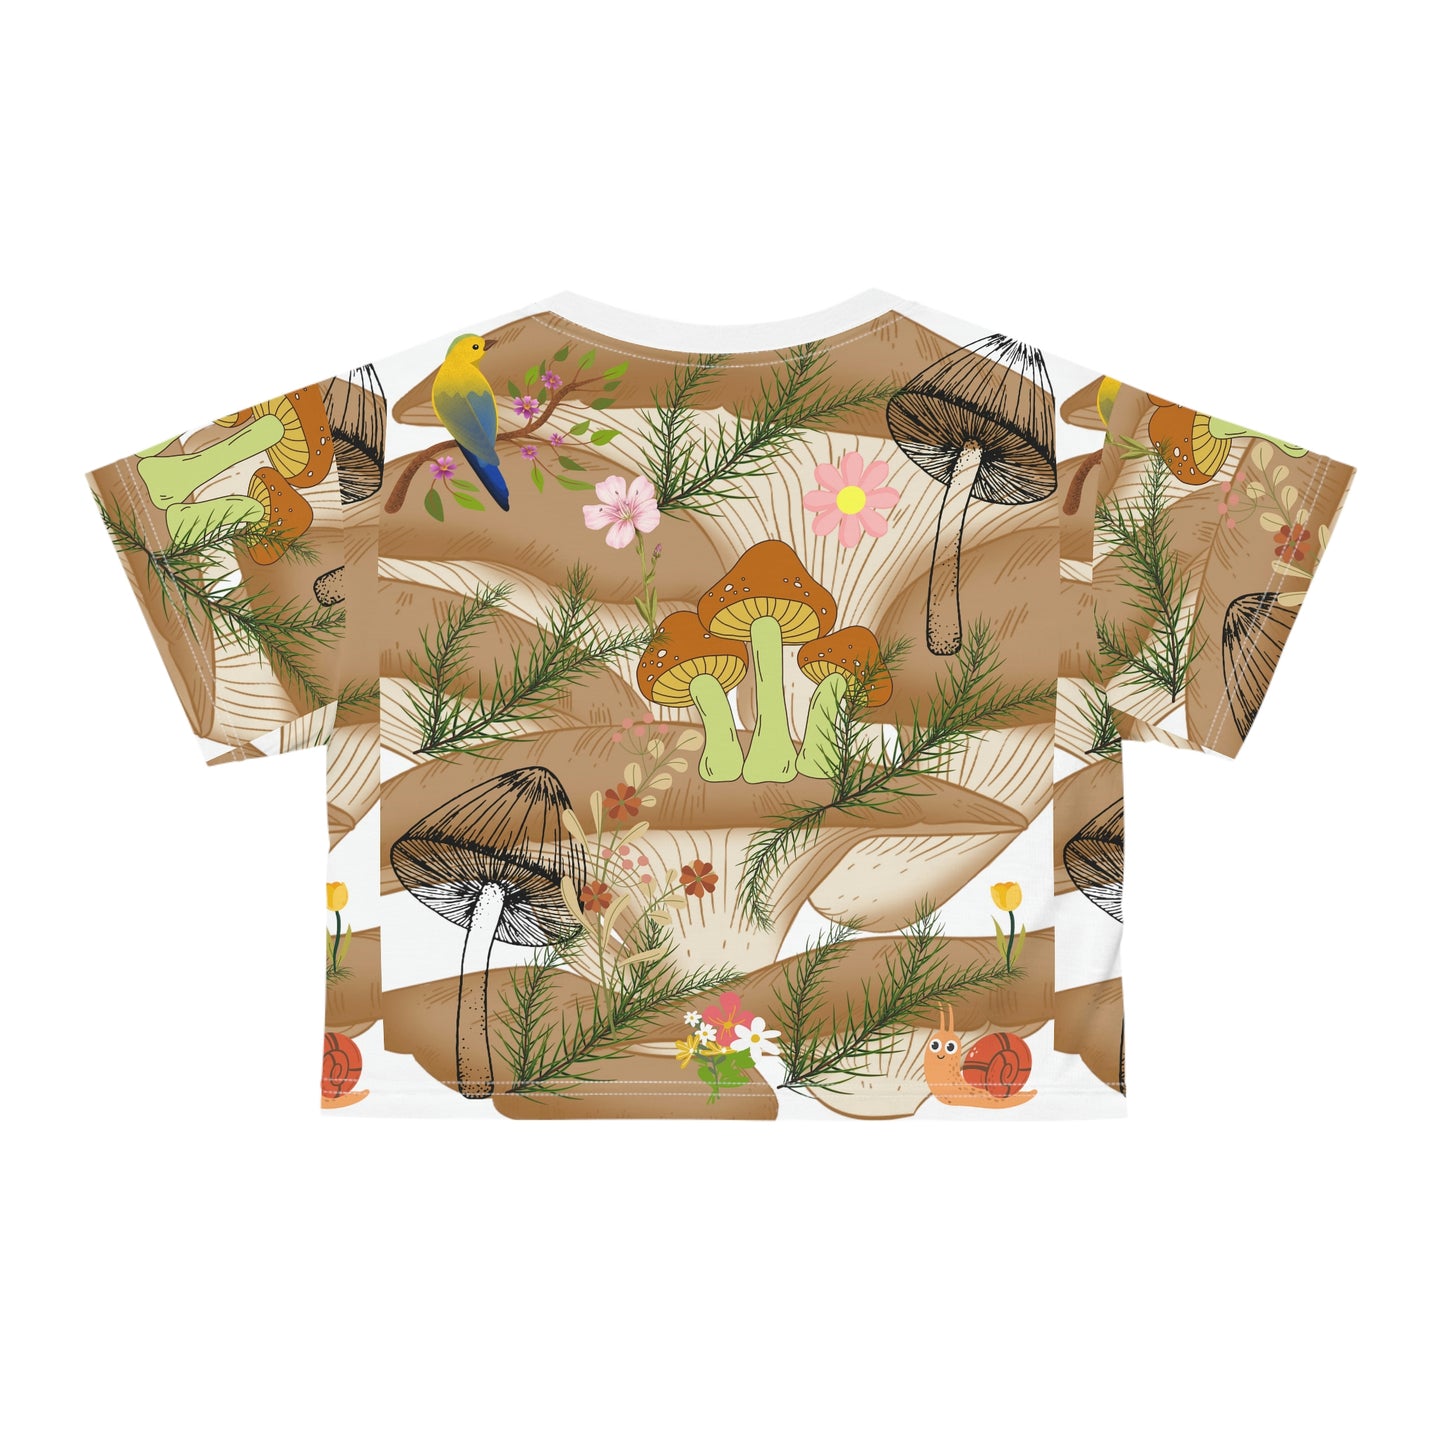 Bring Nature's Beauty to Your Wardrobe with a Women's T-Shirt Featuring Mushroom, Bird, and Flower Designs! AOP Crop Tee